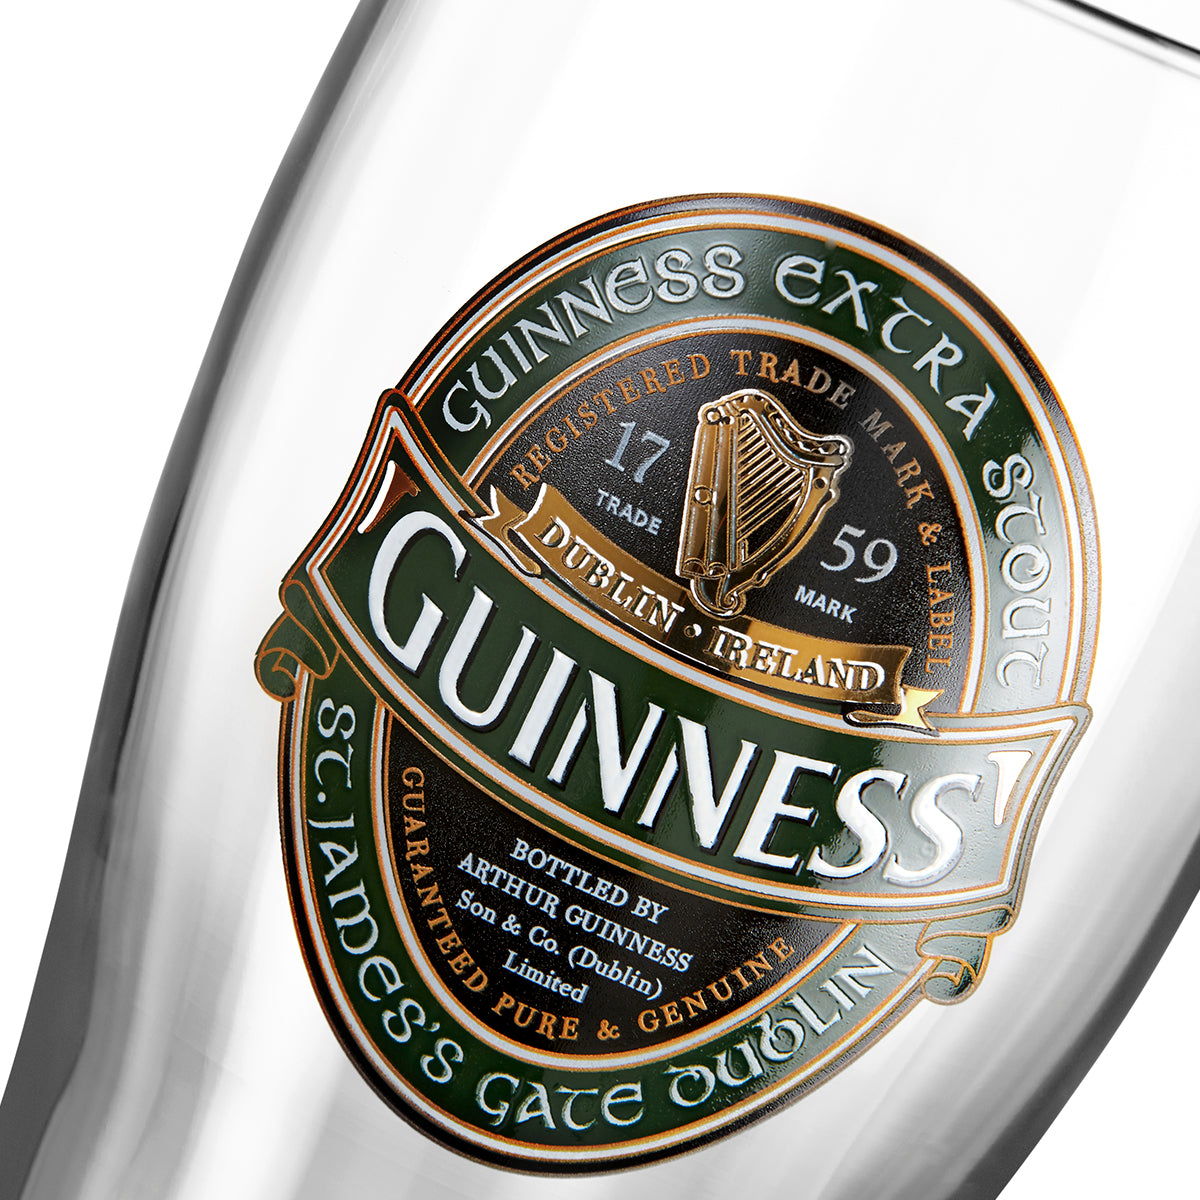 A Guinness Ireland Collection Pint Glass - 2 Pack on a white background, representing Ireland.